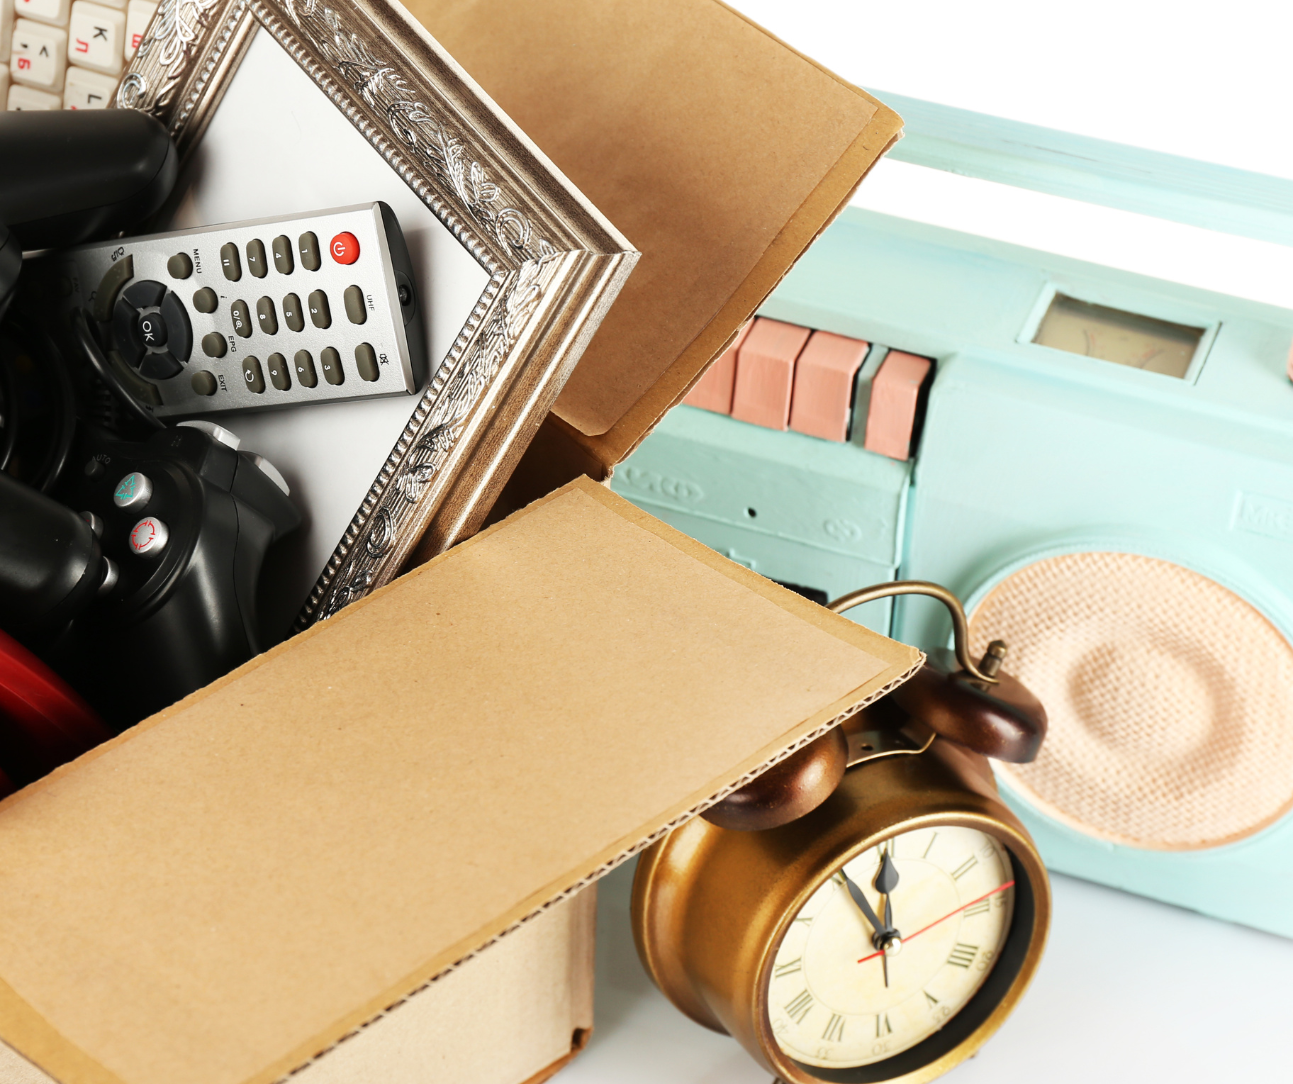 Cardboard box filled with TV remote, picture frame with a clock and radio sitting next to it